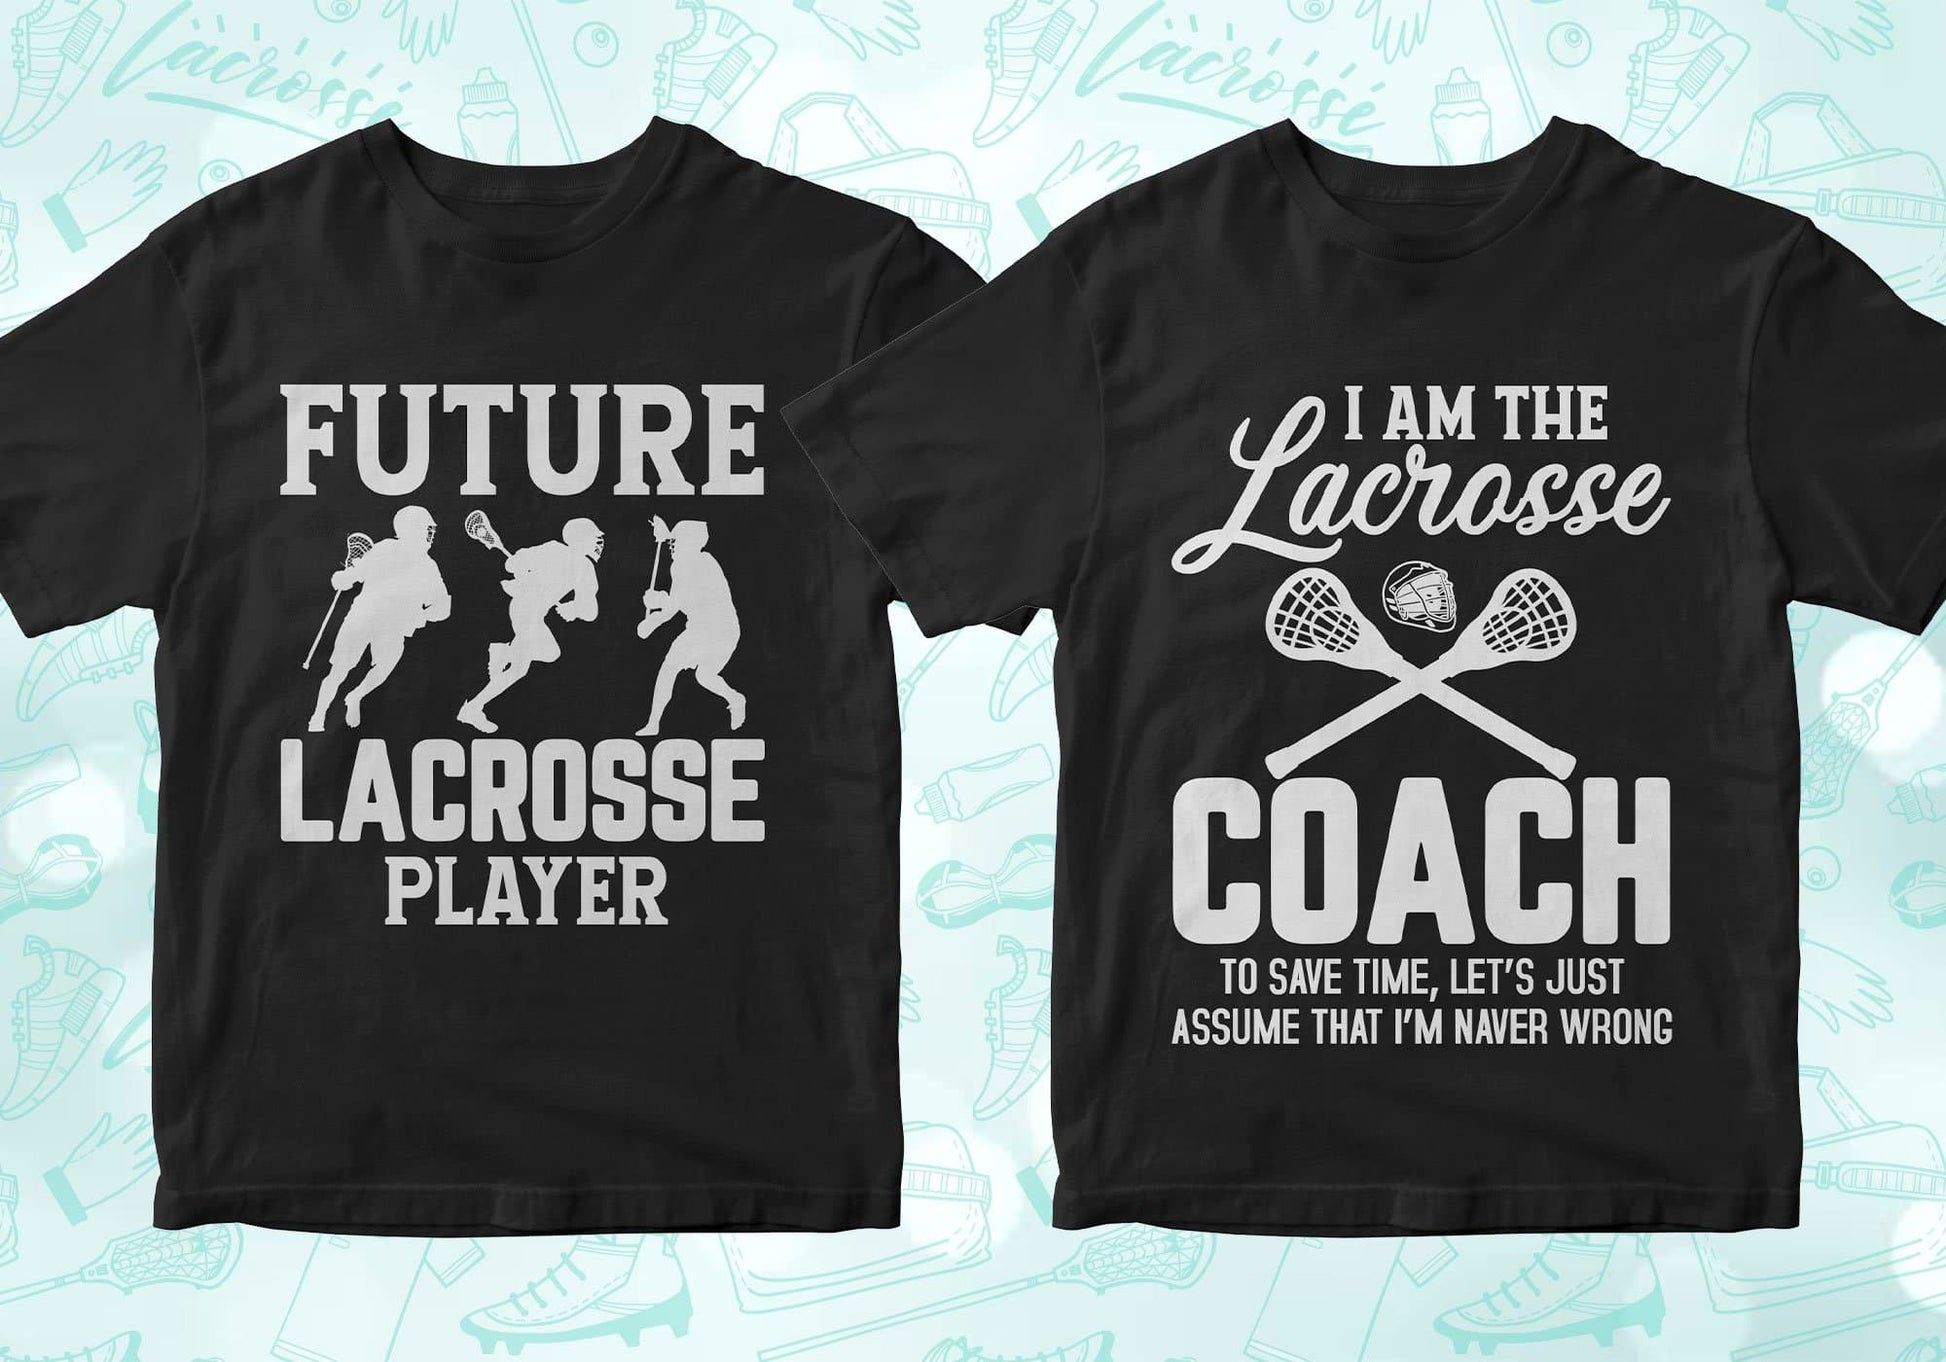 future lacrosse player, i am the lacrosse coach to save time let's just assume that I'm never wrong, lacrosse shirts lacrosse tshirt lacrosse t shirts lacrosse shirt designs lacrosse graphic